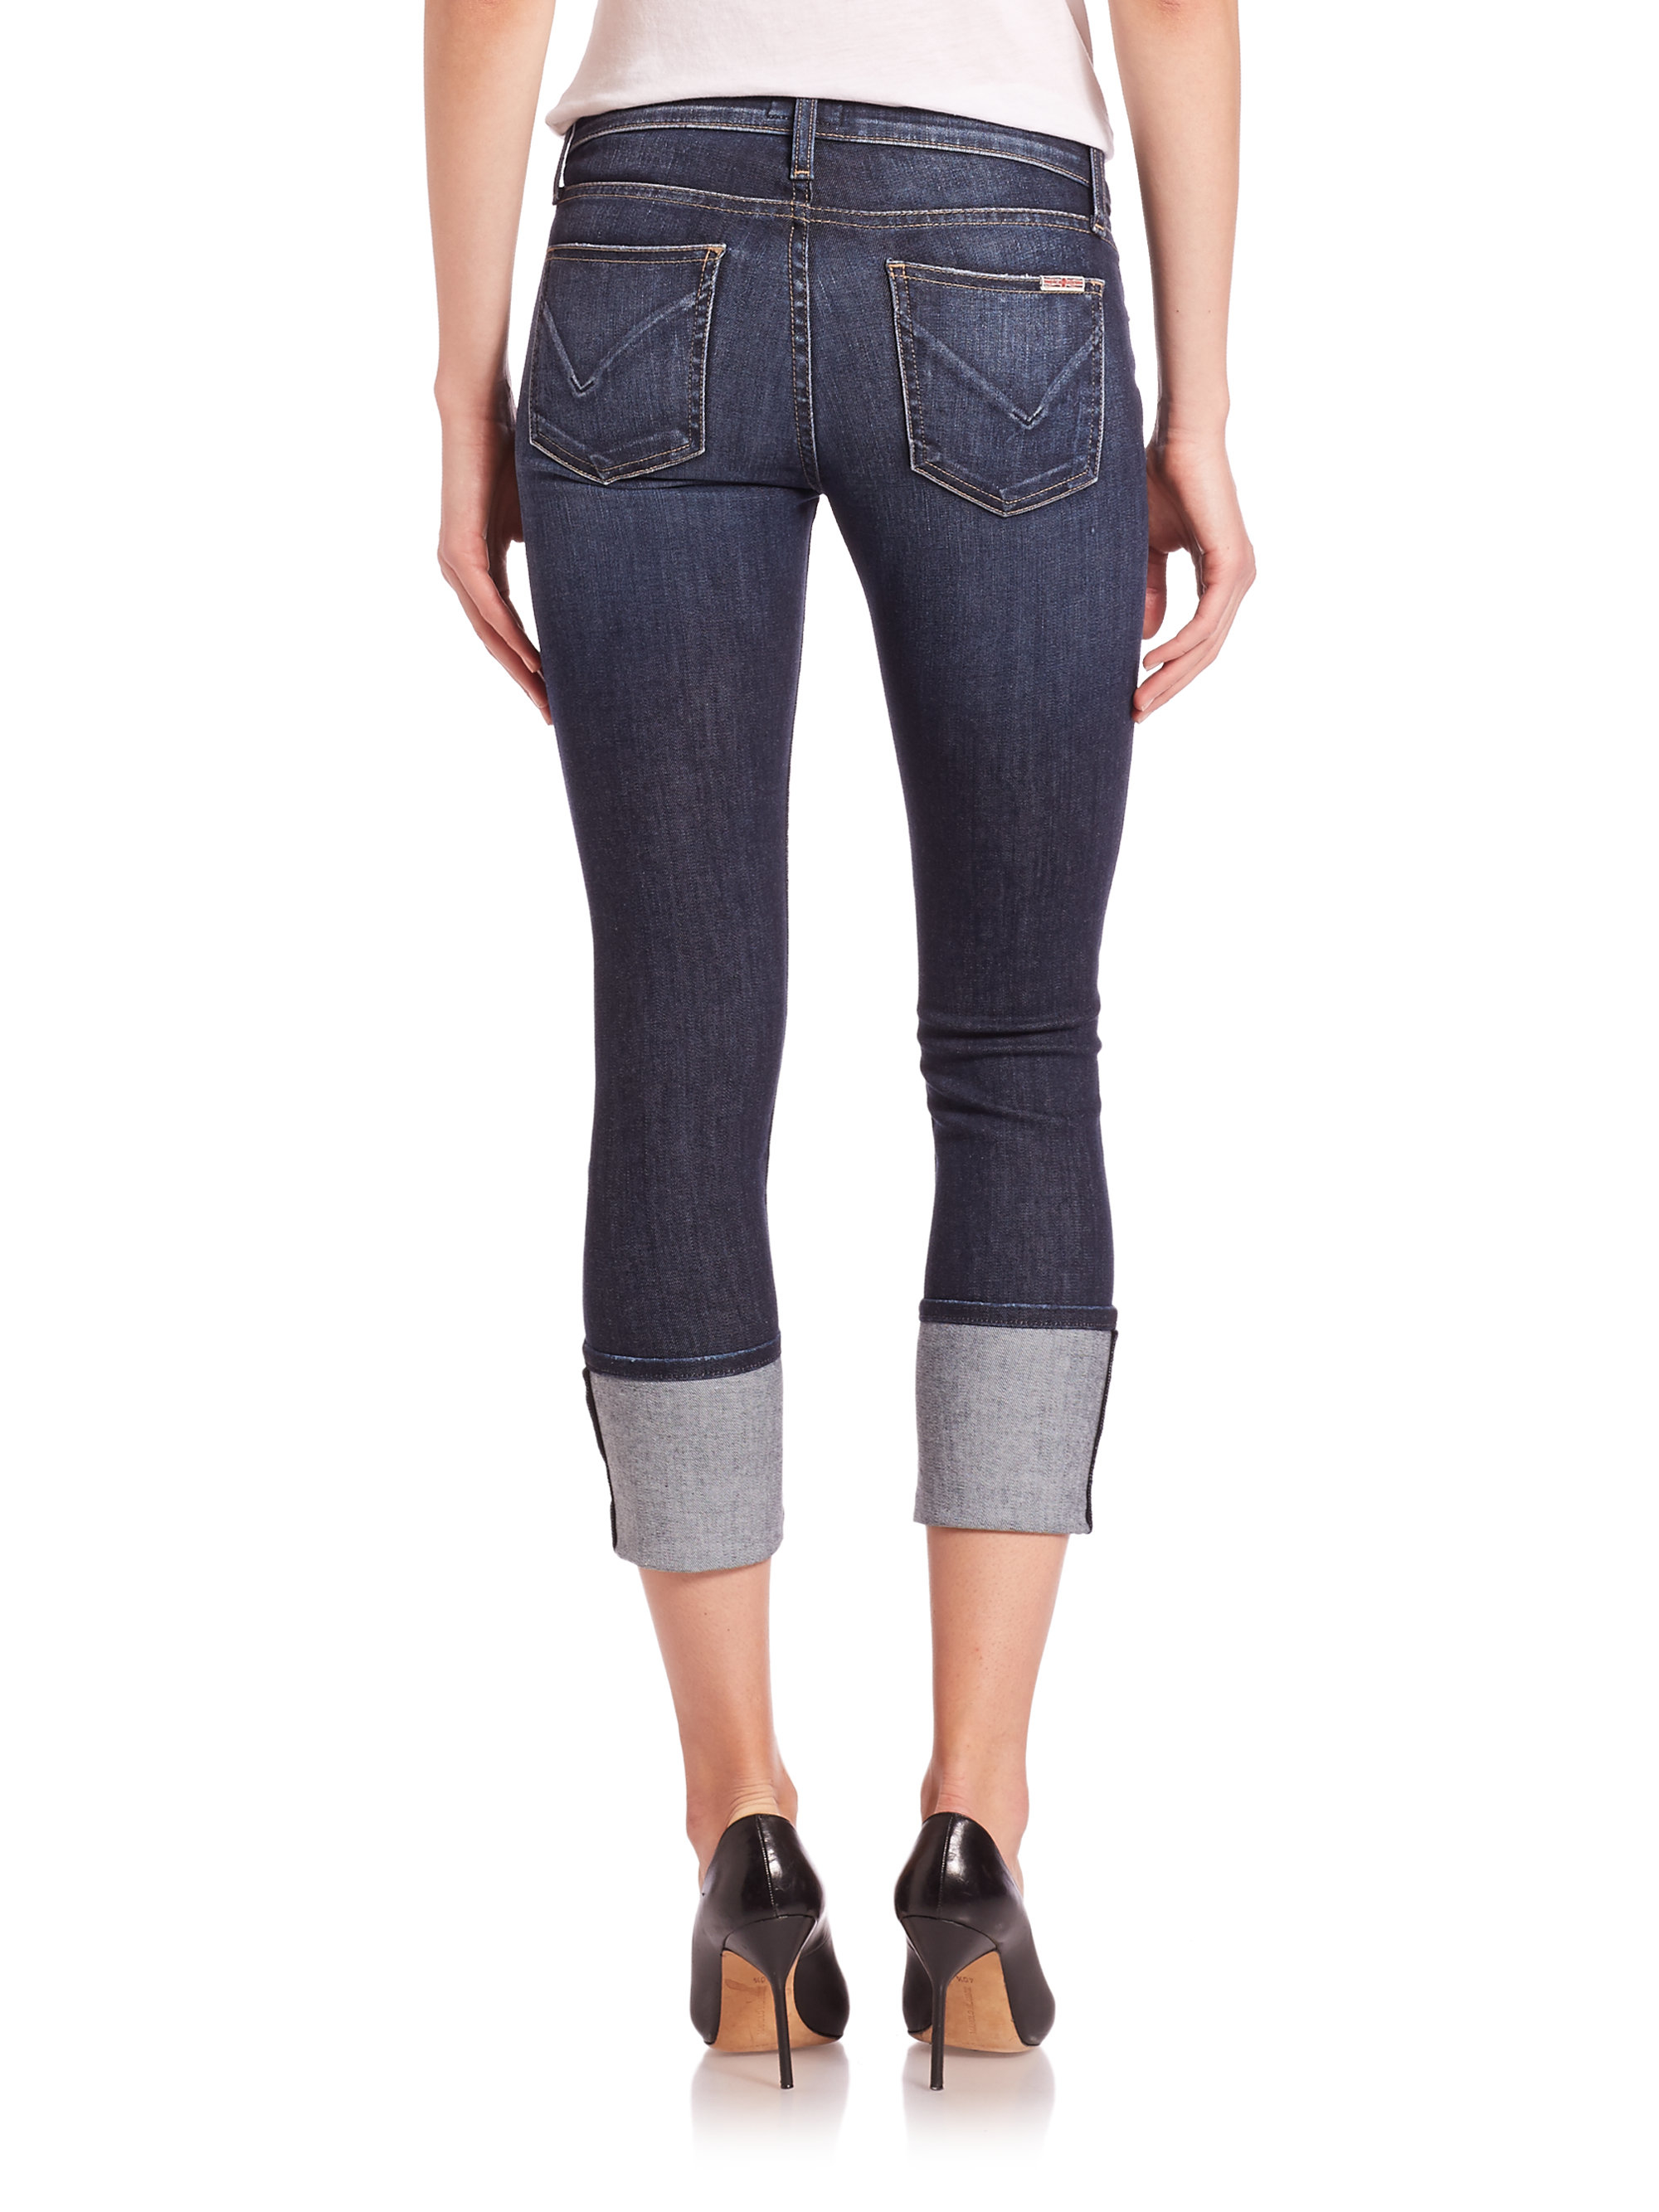 Lyst - Hudson Jeans Muse Rolled Cropped Jeans in Blue